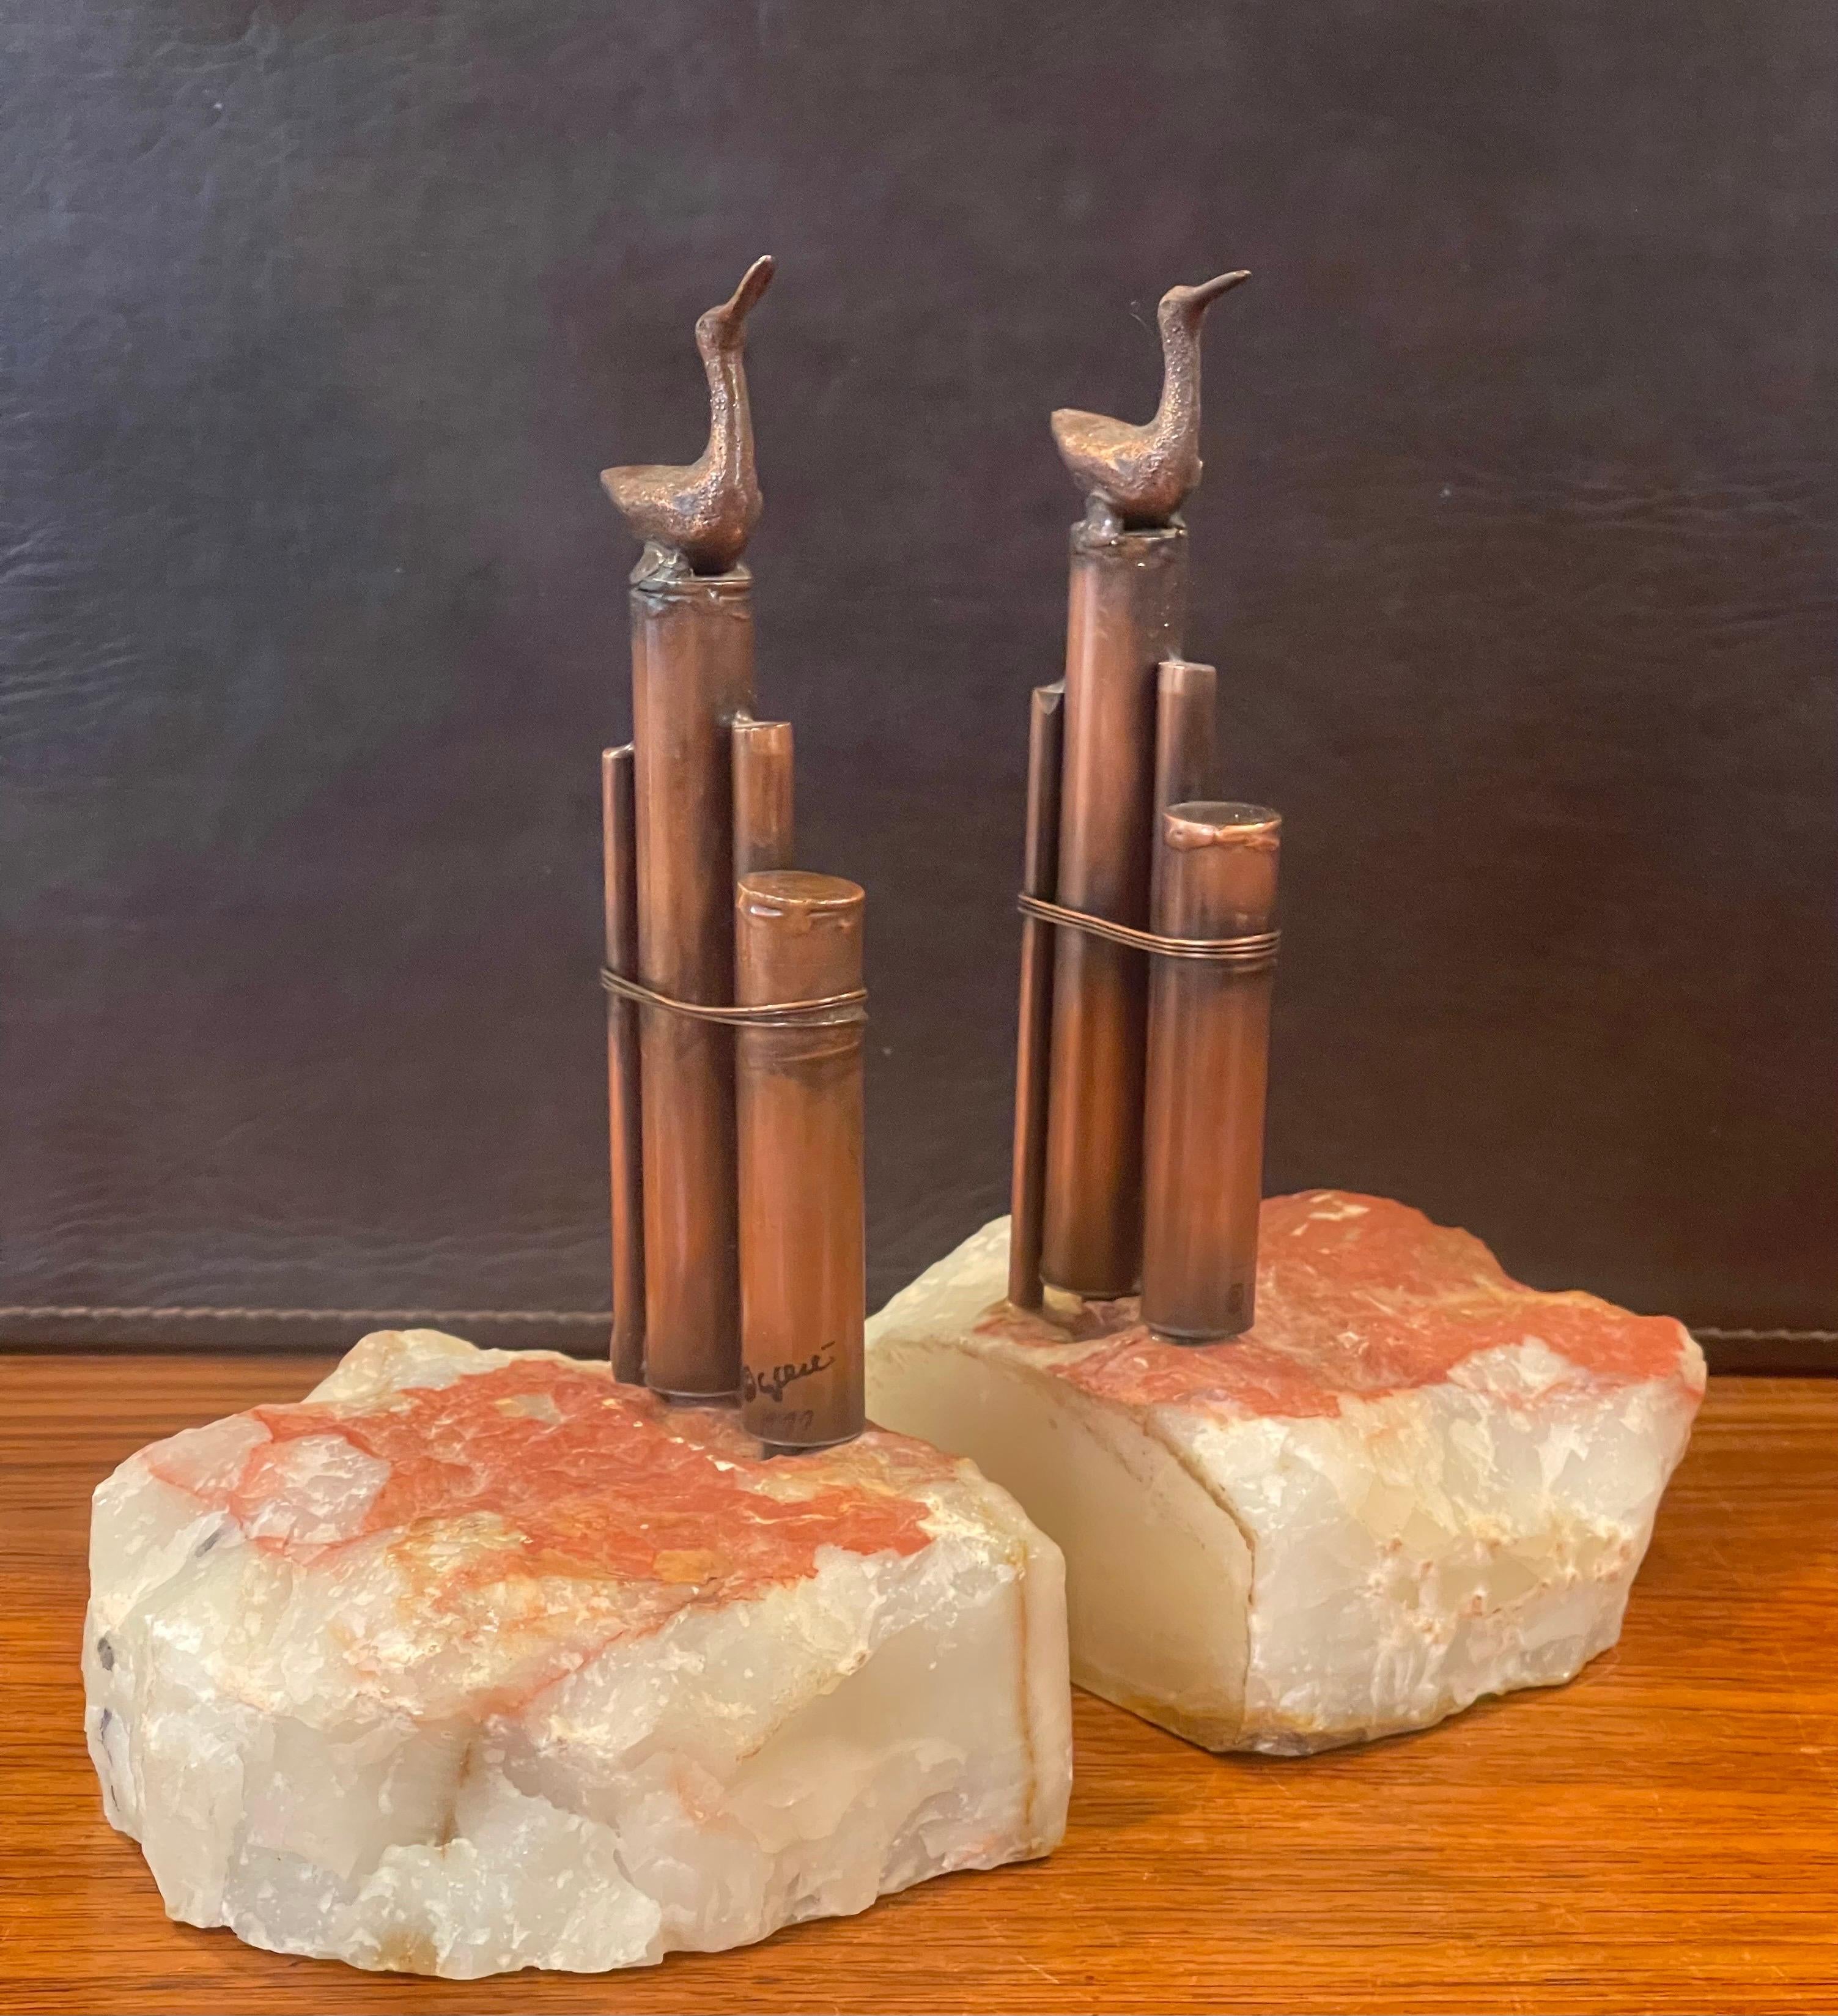 Excellent and rare pair of sea birds on ocean pylon bookends by Curtis Jere for Artisan House, circa 1977. The pair are signed and dated and are in very good vintage condition with a wonderful patina. They measure 9